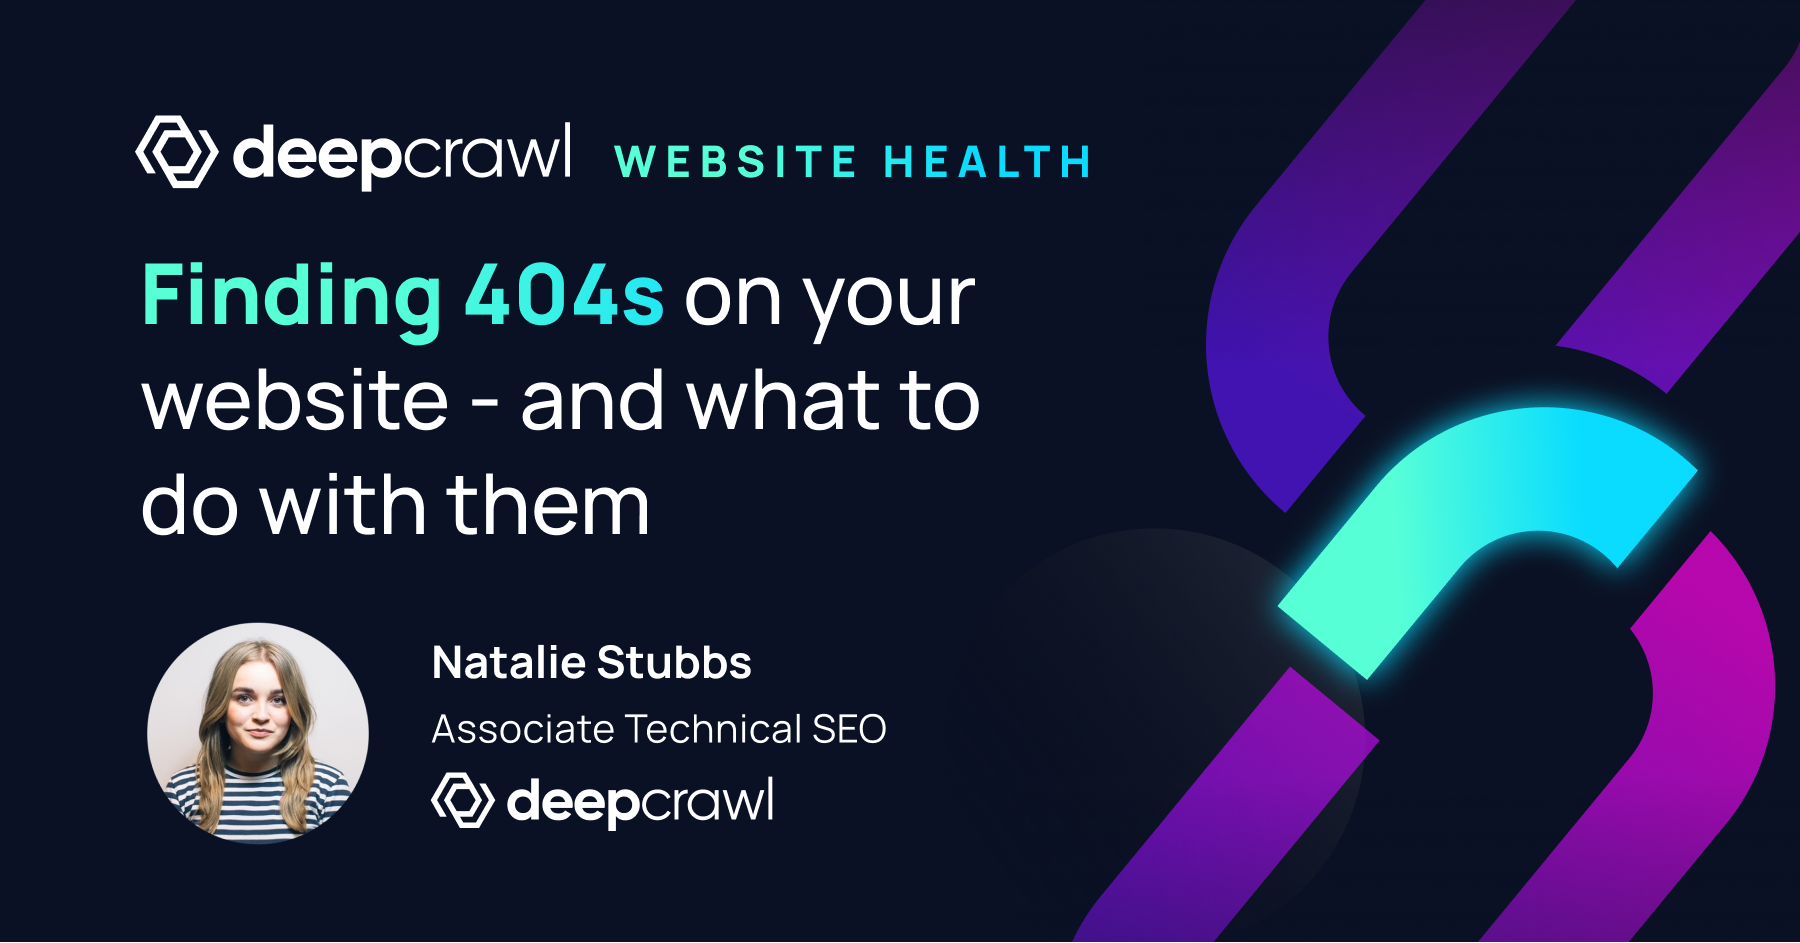 Deepcrawl Blog Post about finding 404 errors on your website and SEO implications